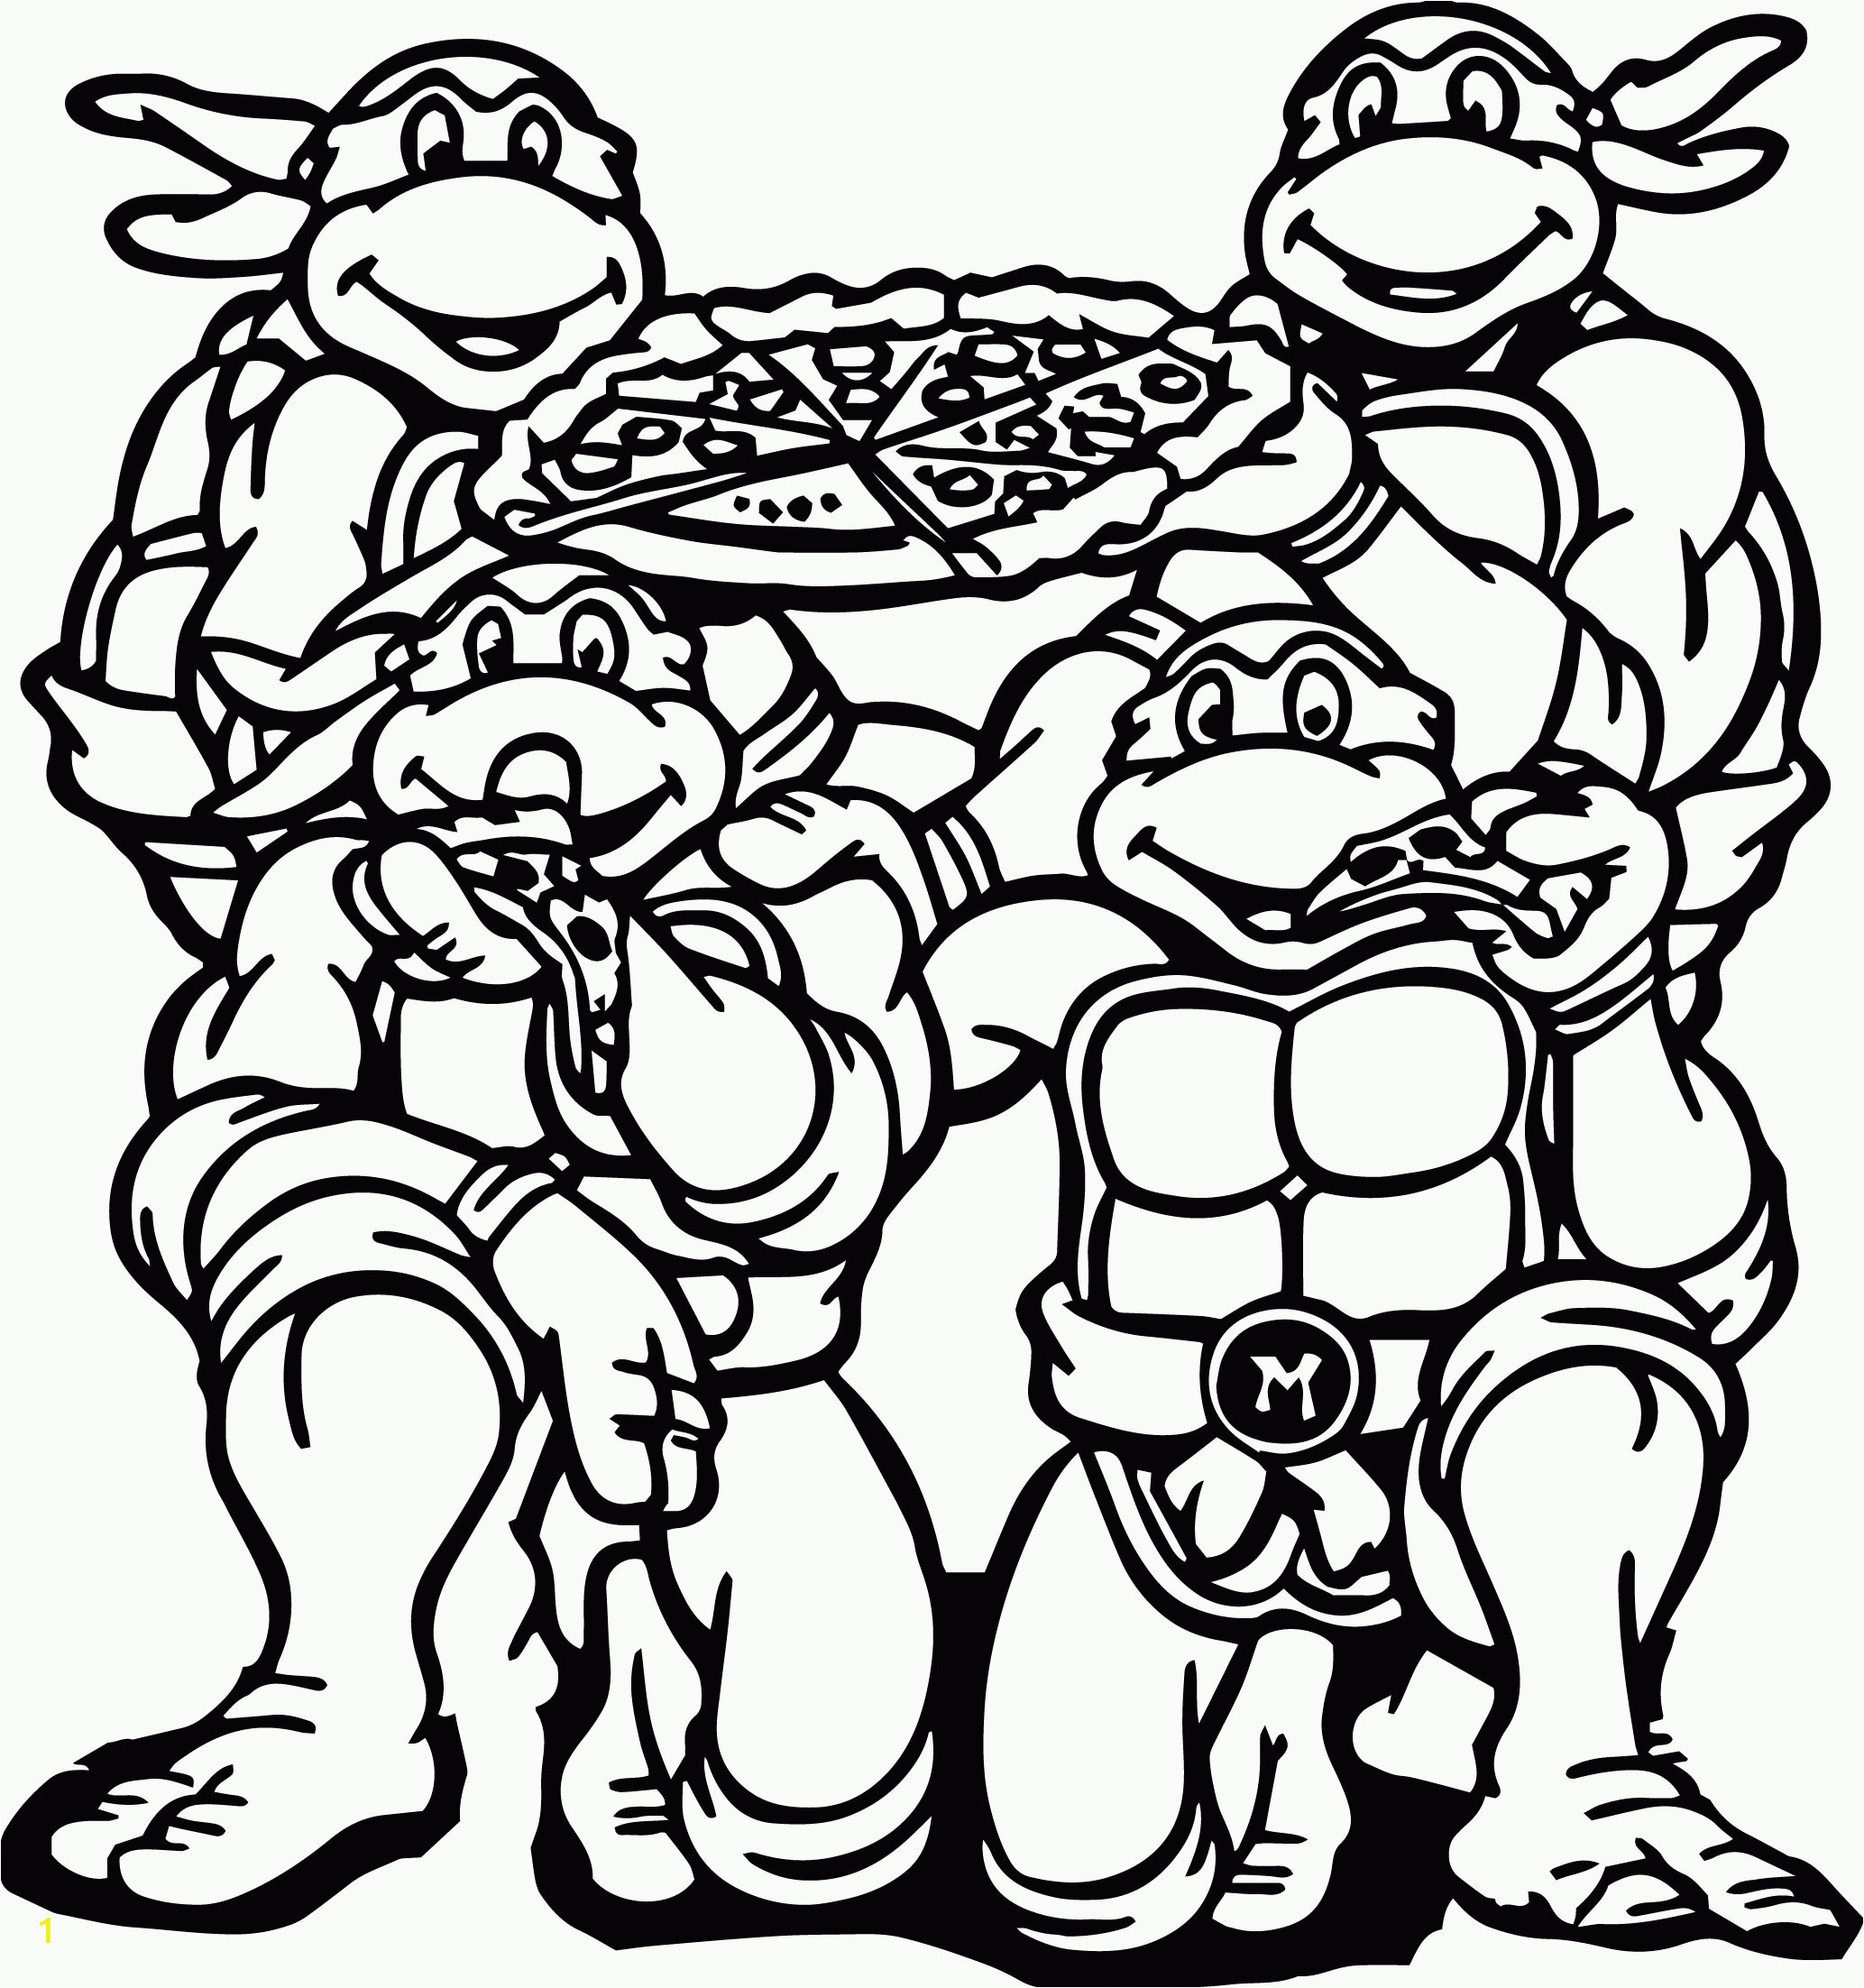 Free Printable Ninja Turtle Coloring Pages Free Printable Teenage Mutant Ninja Turtles Coloring Pages